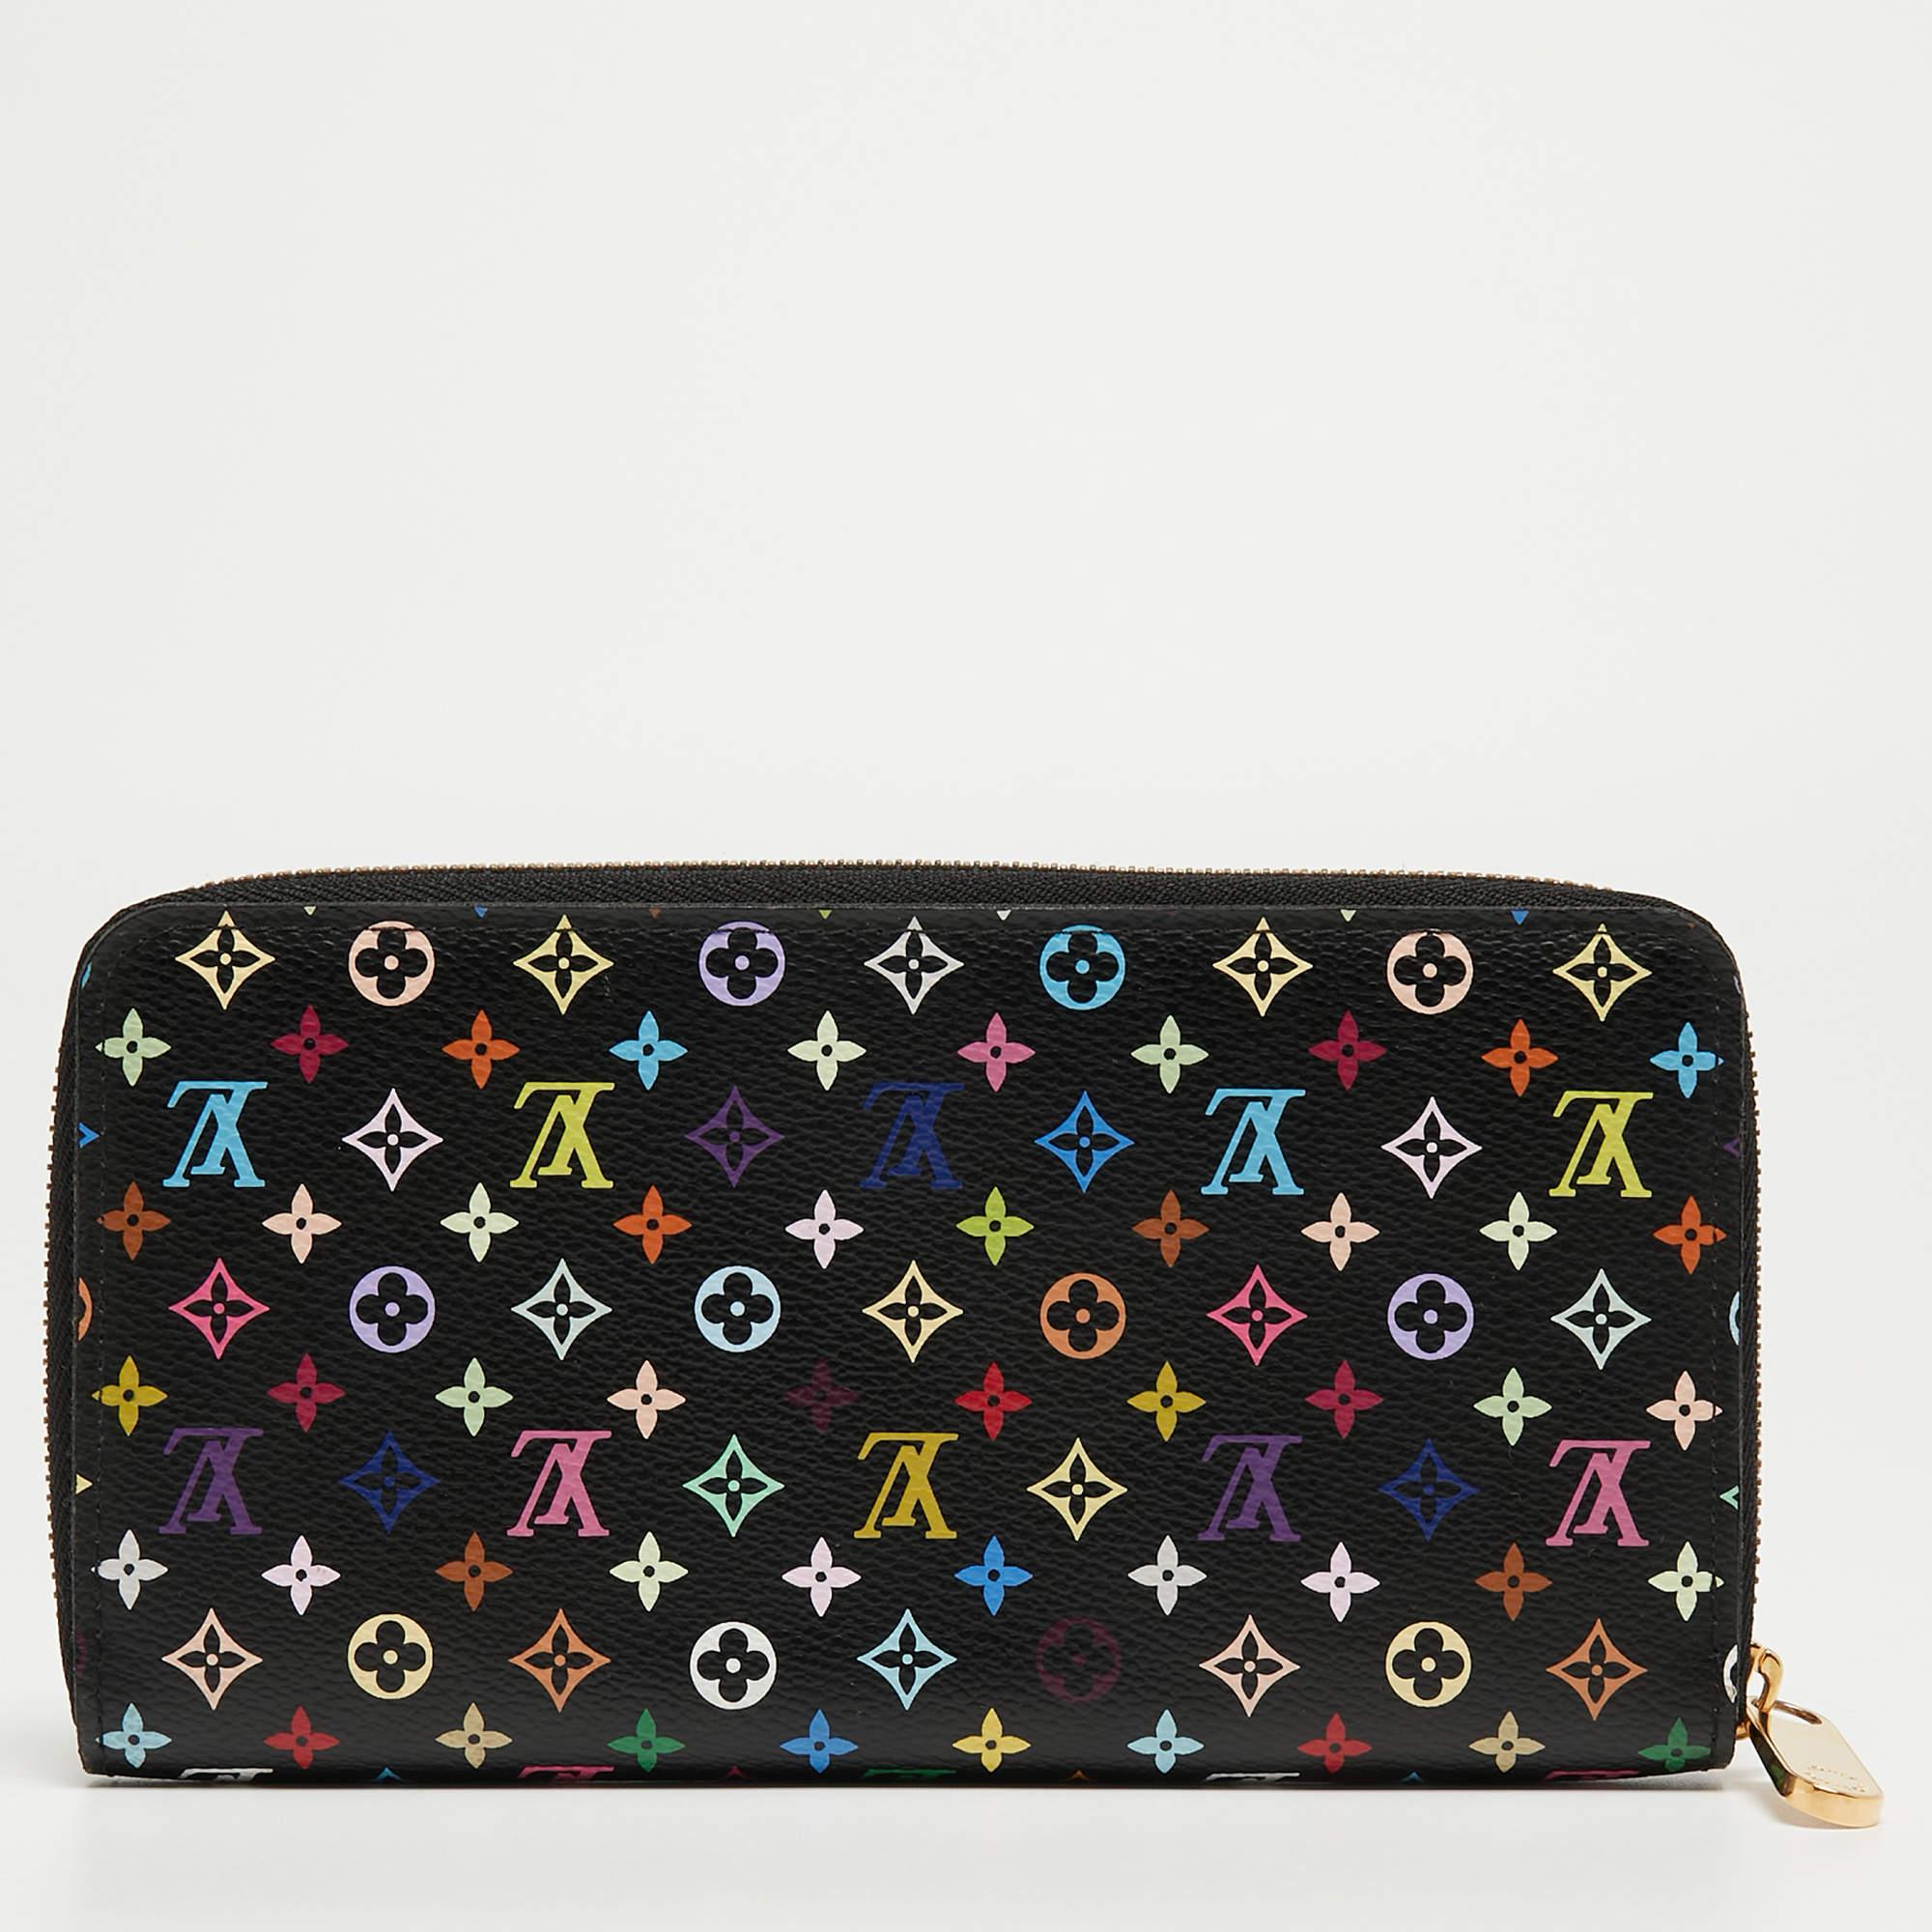 This Louis Vuitton Zippy wallet is conveniently designed for everyday use. Crafted from Multicolore Monogram canvas, the wallet has a wide zip closure which opens to reveal multiple slots, well-lined compartments, and a zip pocket for you to neatly